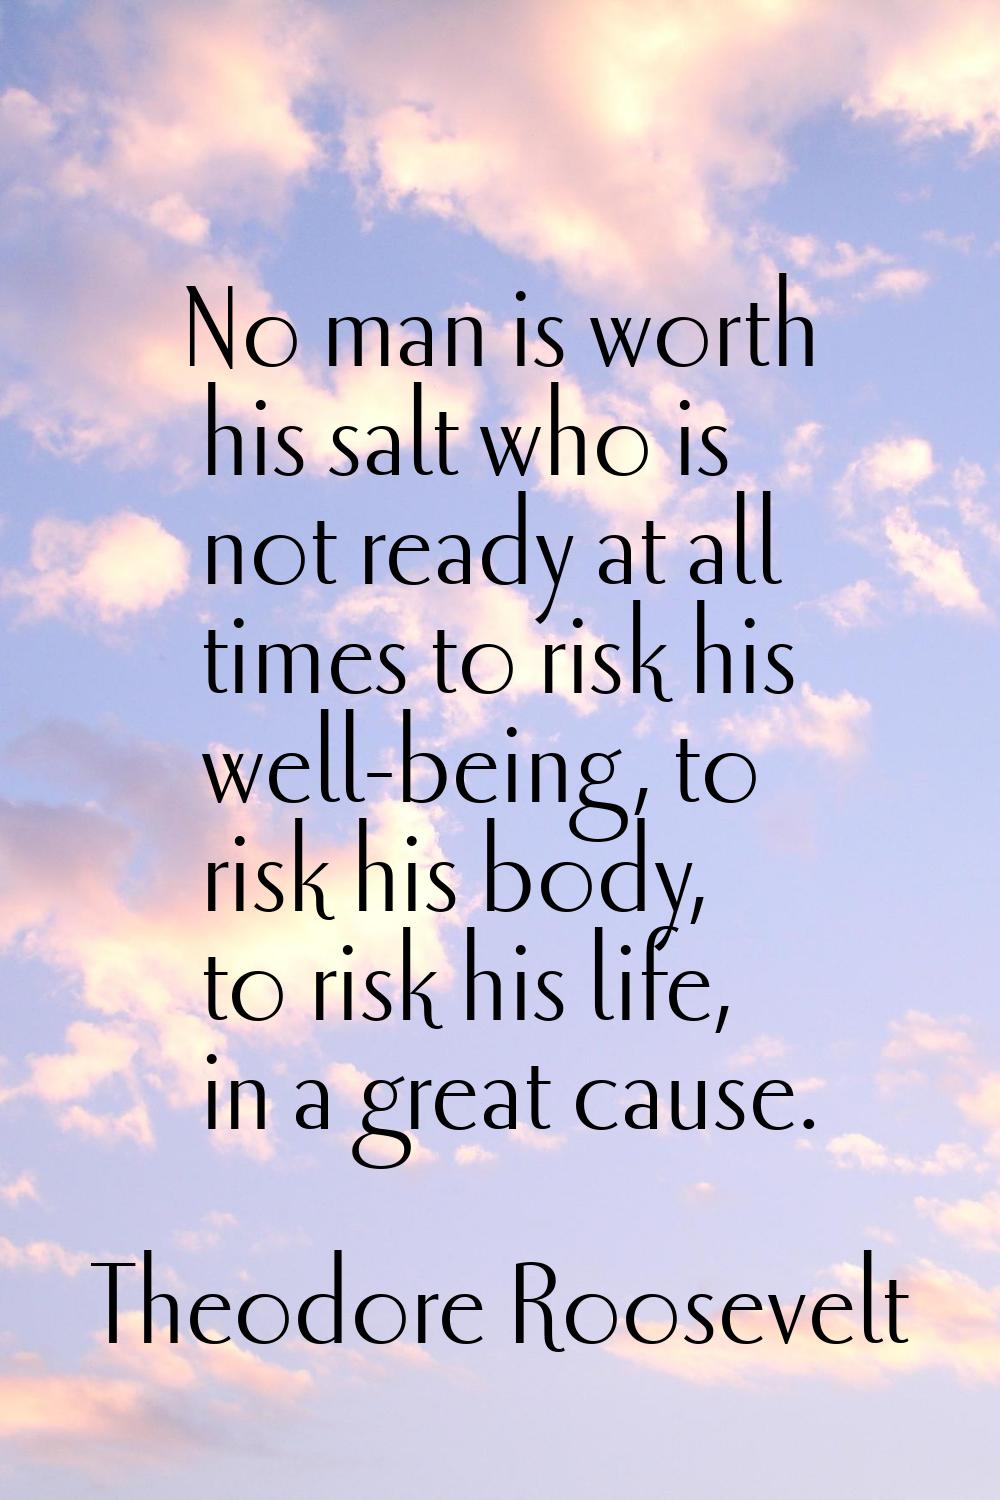 No man is worth his salt who is not ready at all times to risk his well-being, to risk his body, to